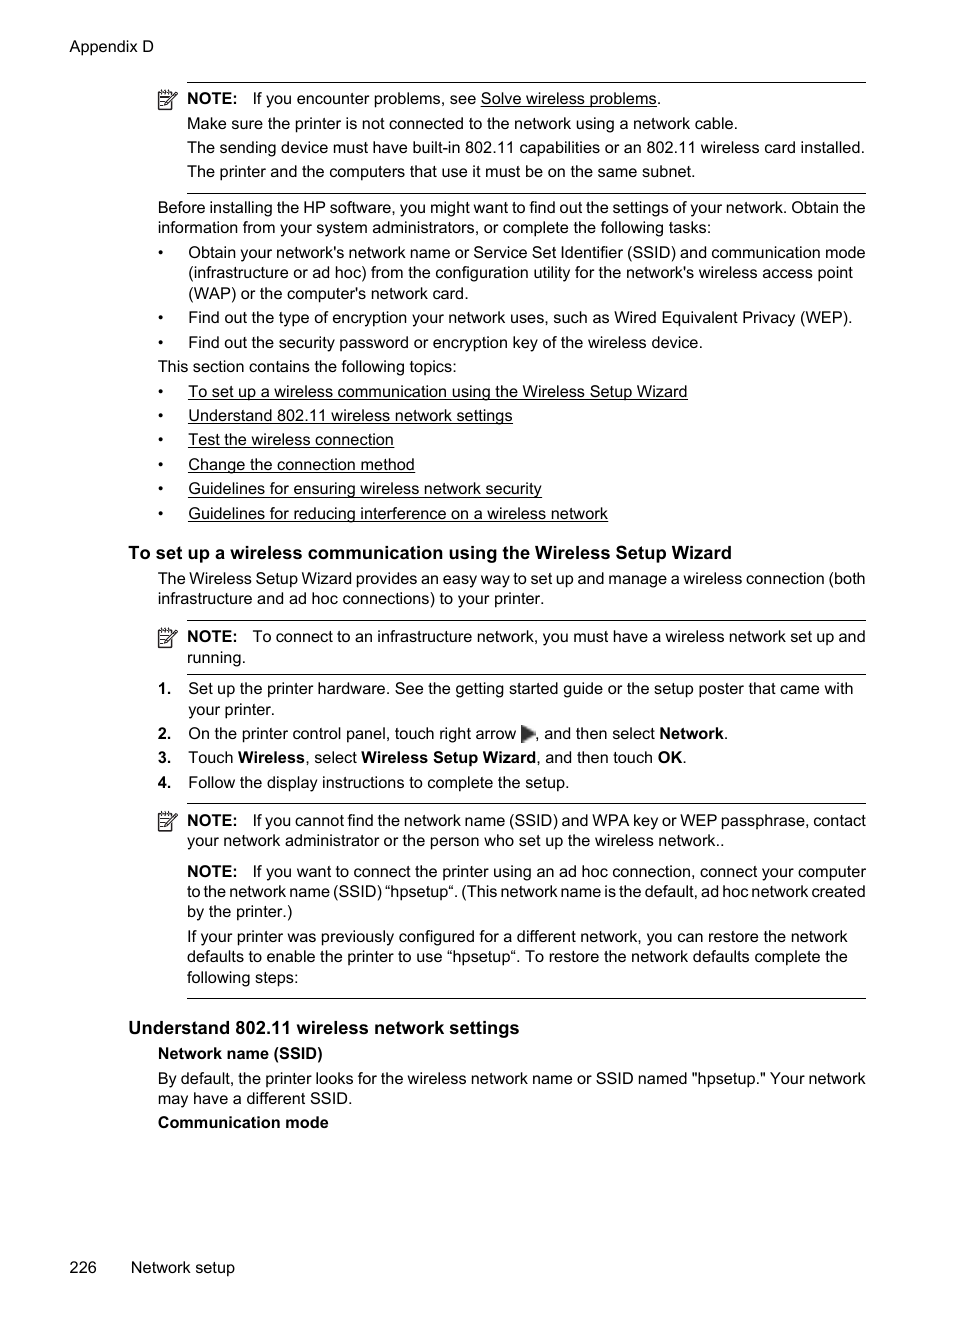 Understand 802.11 wireless network settings | HP Officejet 7500A Wide Format  e-All-in-One Printer - E910a User Manual | Page 230 / 252 | Original mode